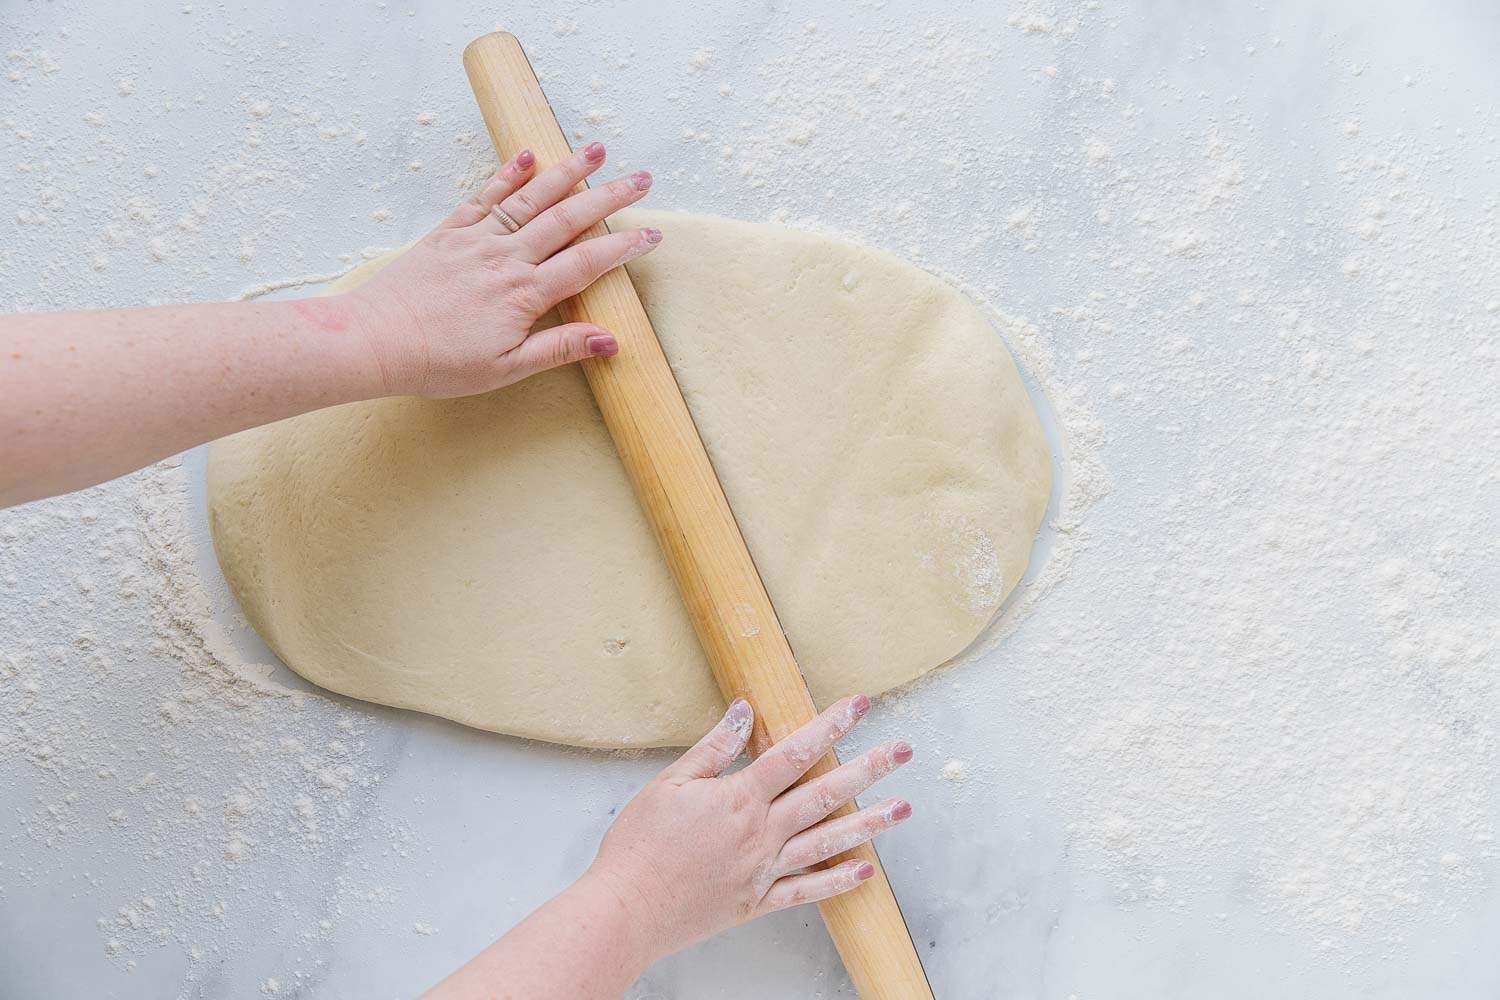 Two hands rolling out dough with a wooden rolling pin.